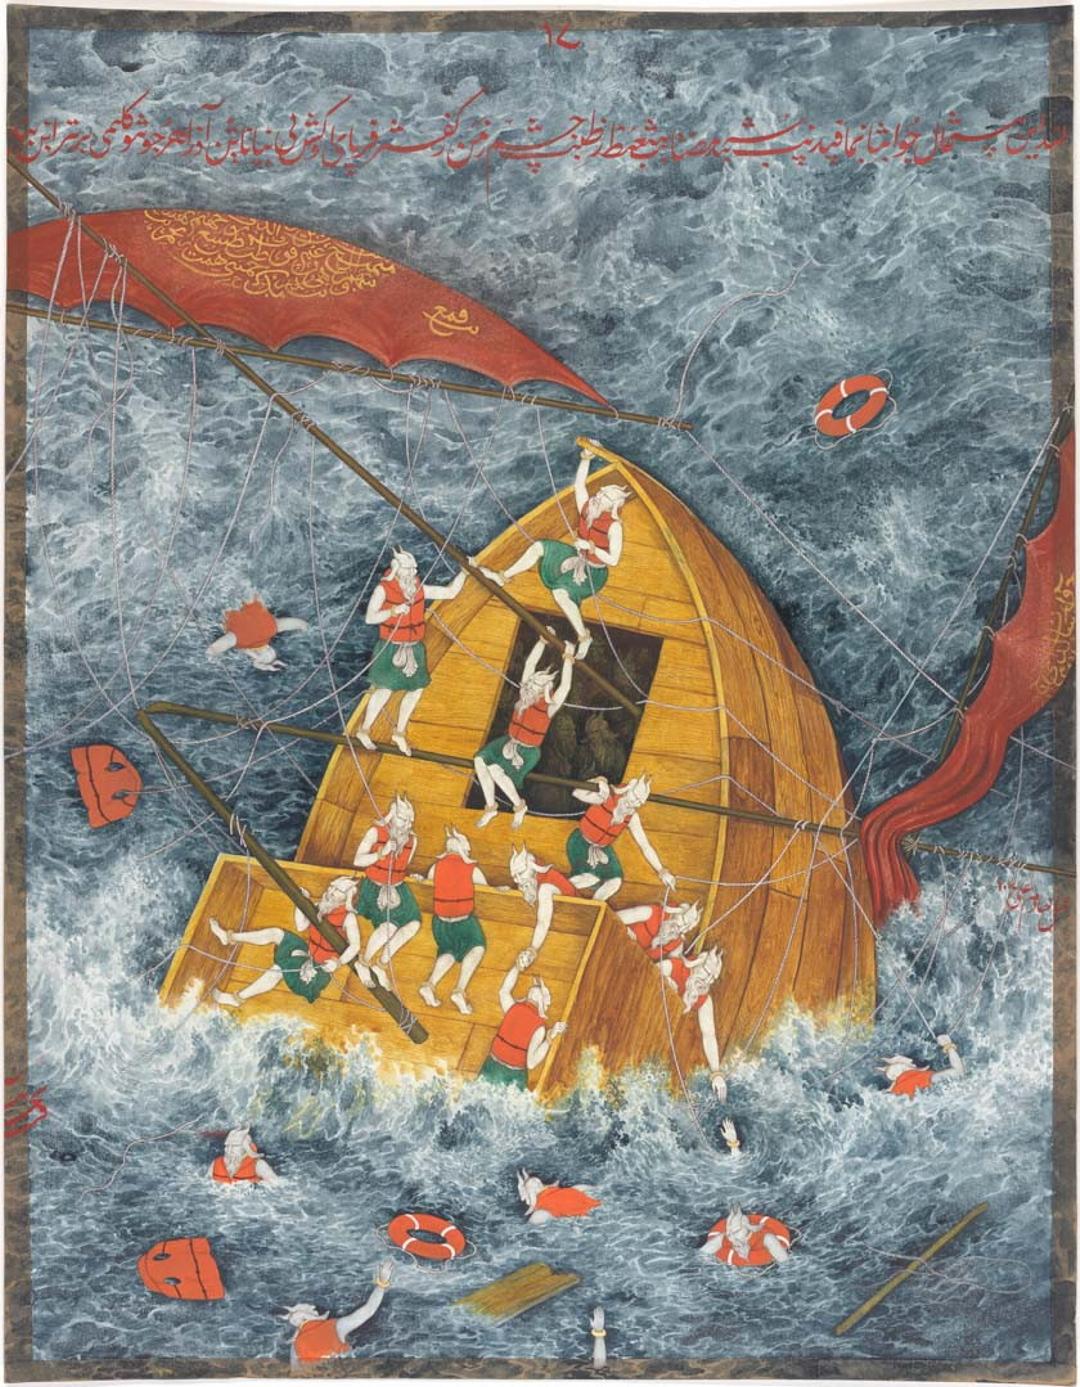 A watercolour painting with ink and gold leaf depicting demonic sailors in life jackets, jumping out of a ship sinking in a turbulent sea.